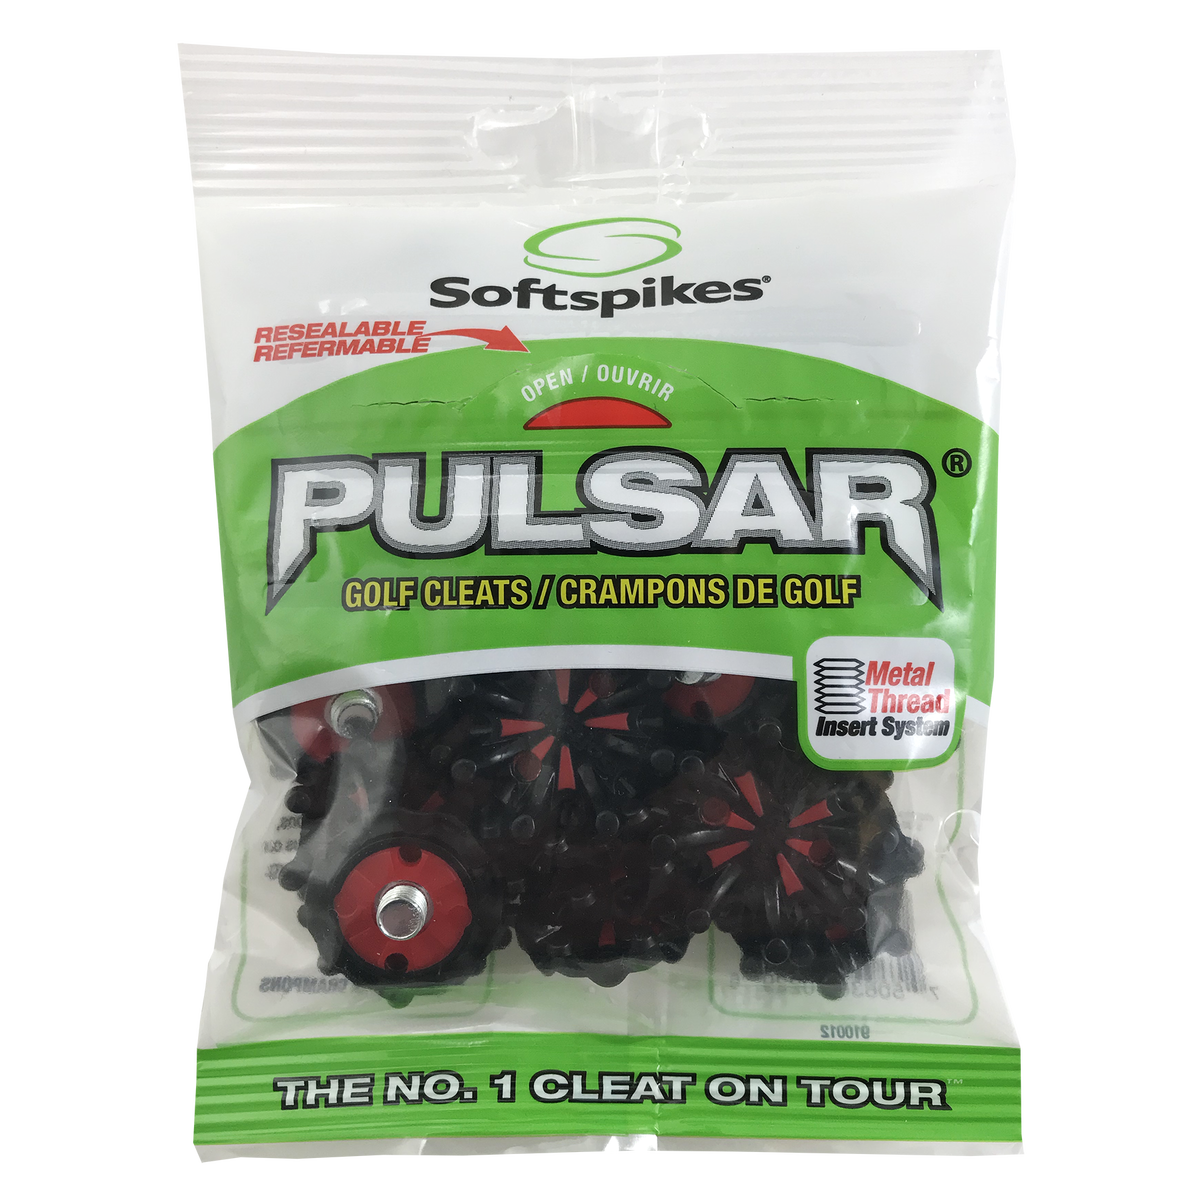 Softspikes Pulsar Small Metal Golf Cleats